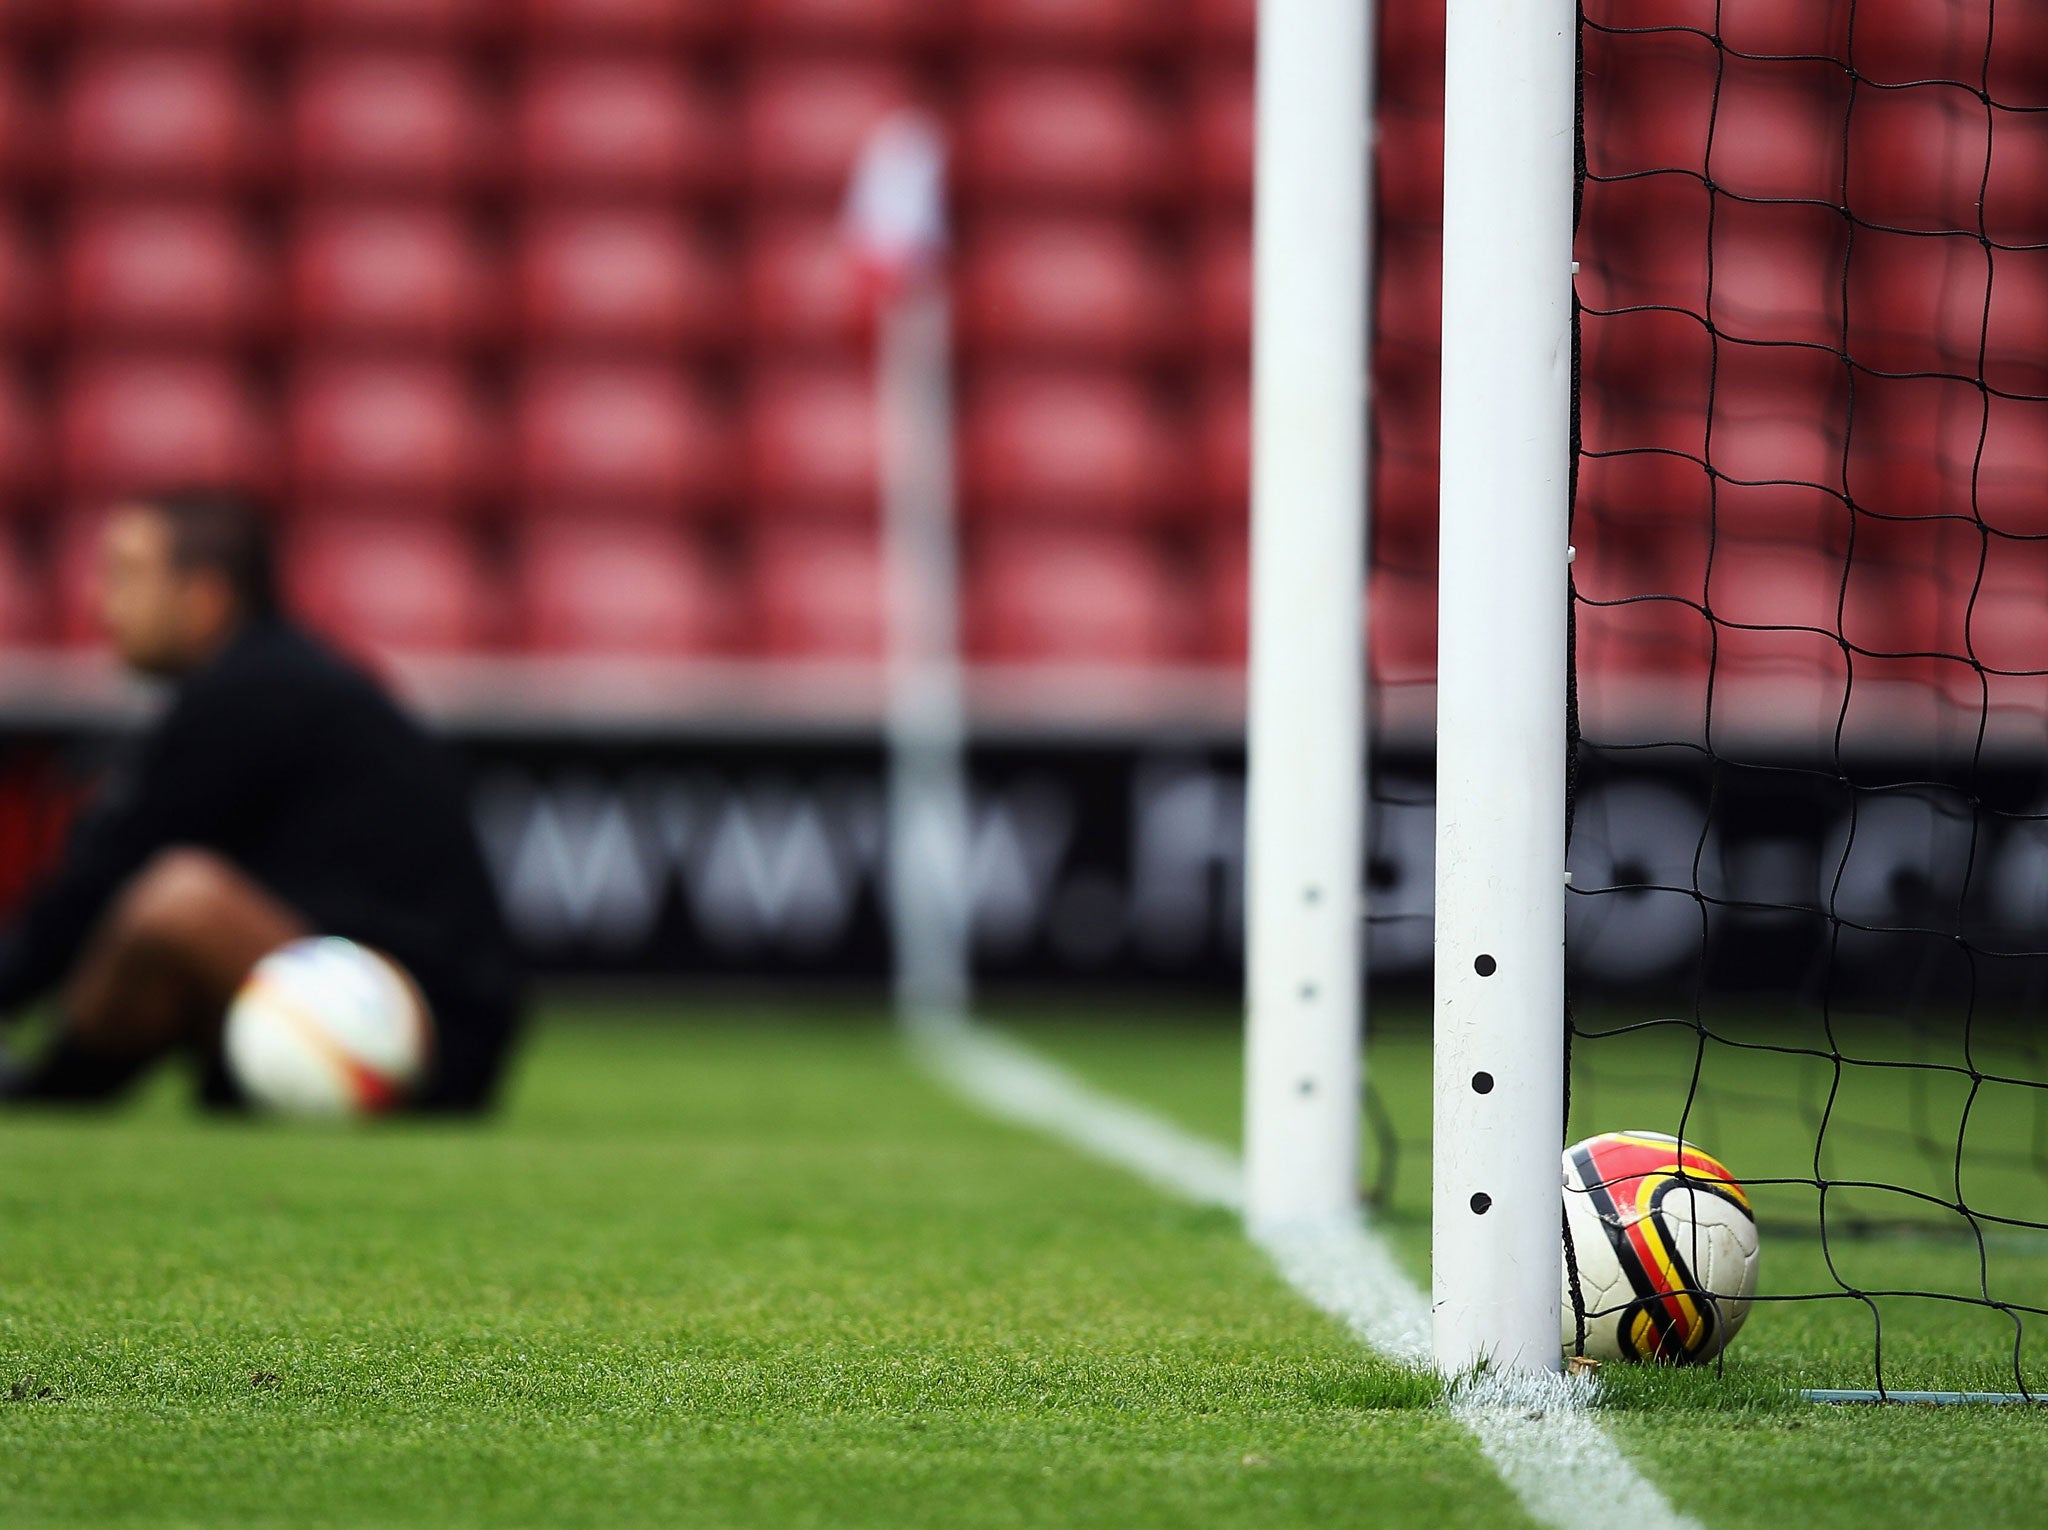 A general view of the goal posts prior to a live Goal-line Technology trial at the Hampshire FA Senior Cup Final between Eastleigh and AFC Totton at St Mary's Stadium on May 16, 2012 in Southampton, England.